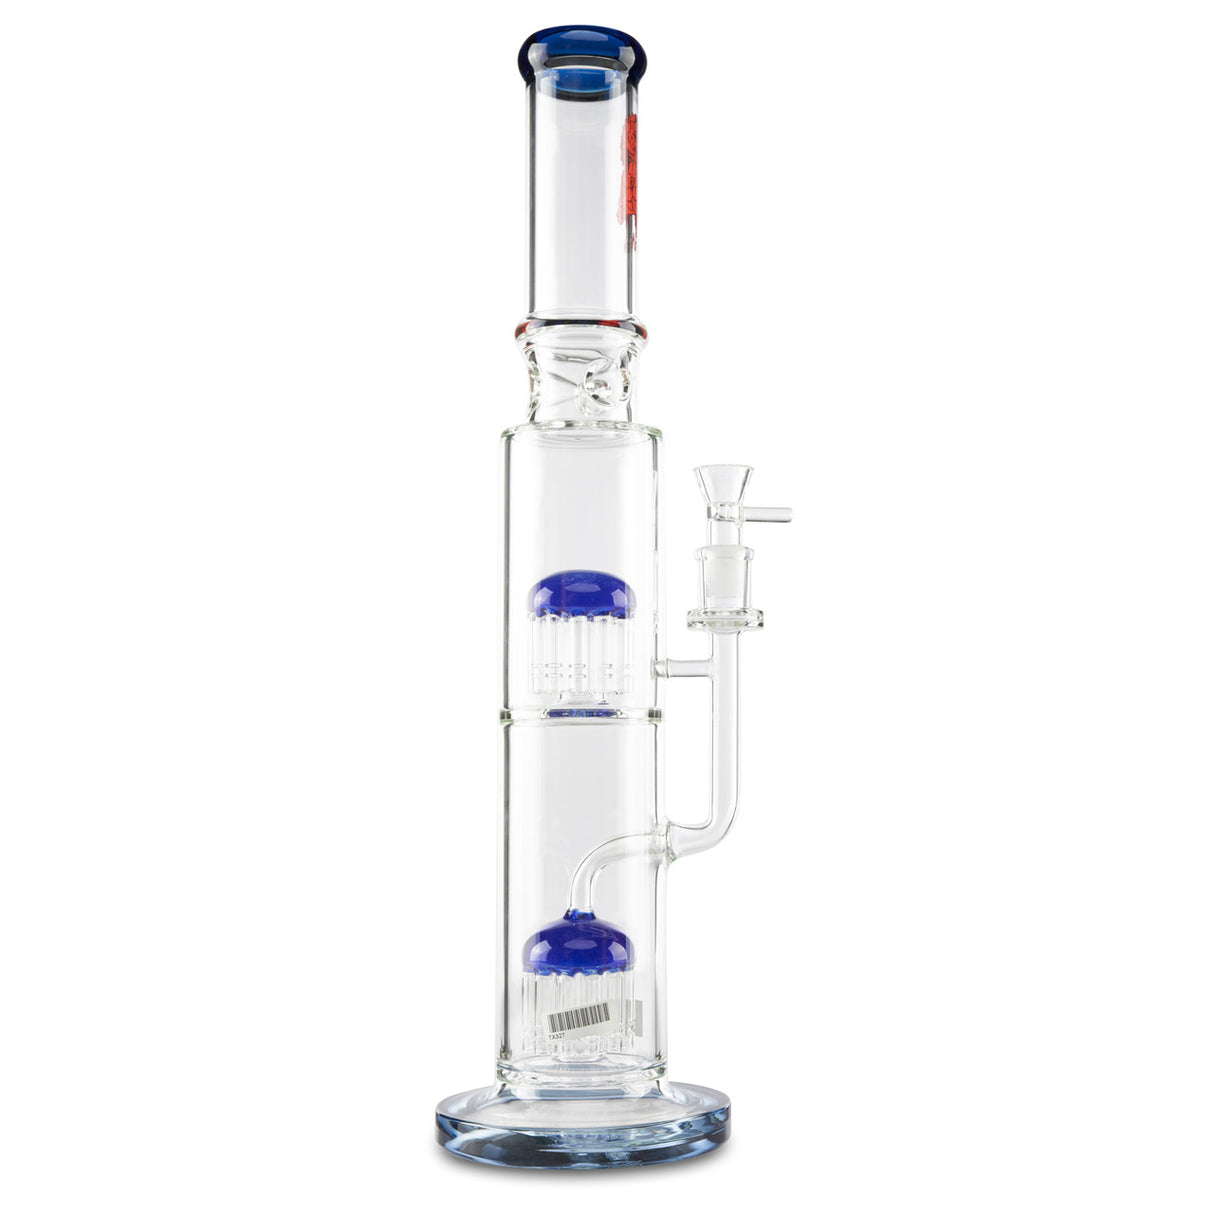 afm double tree perc water pipe bong at cloud 9 smoke co